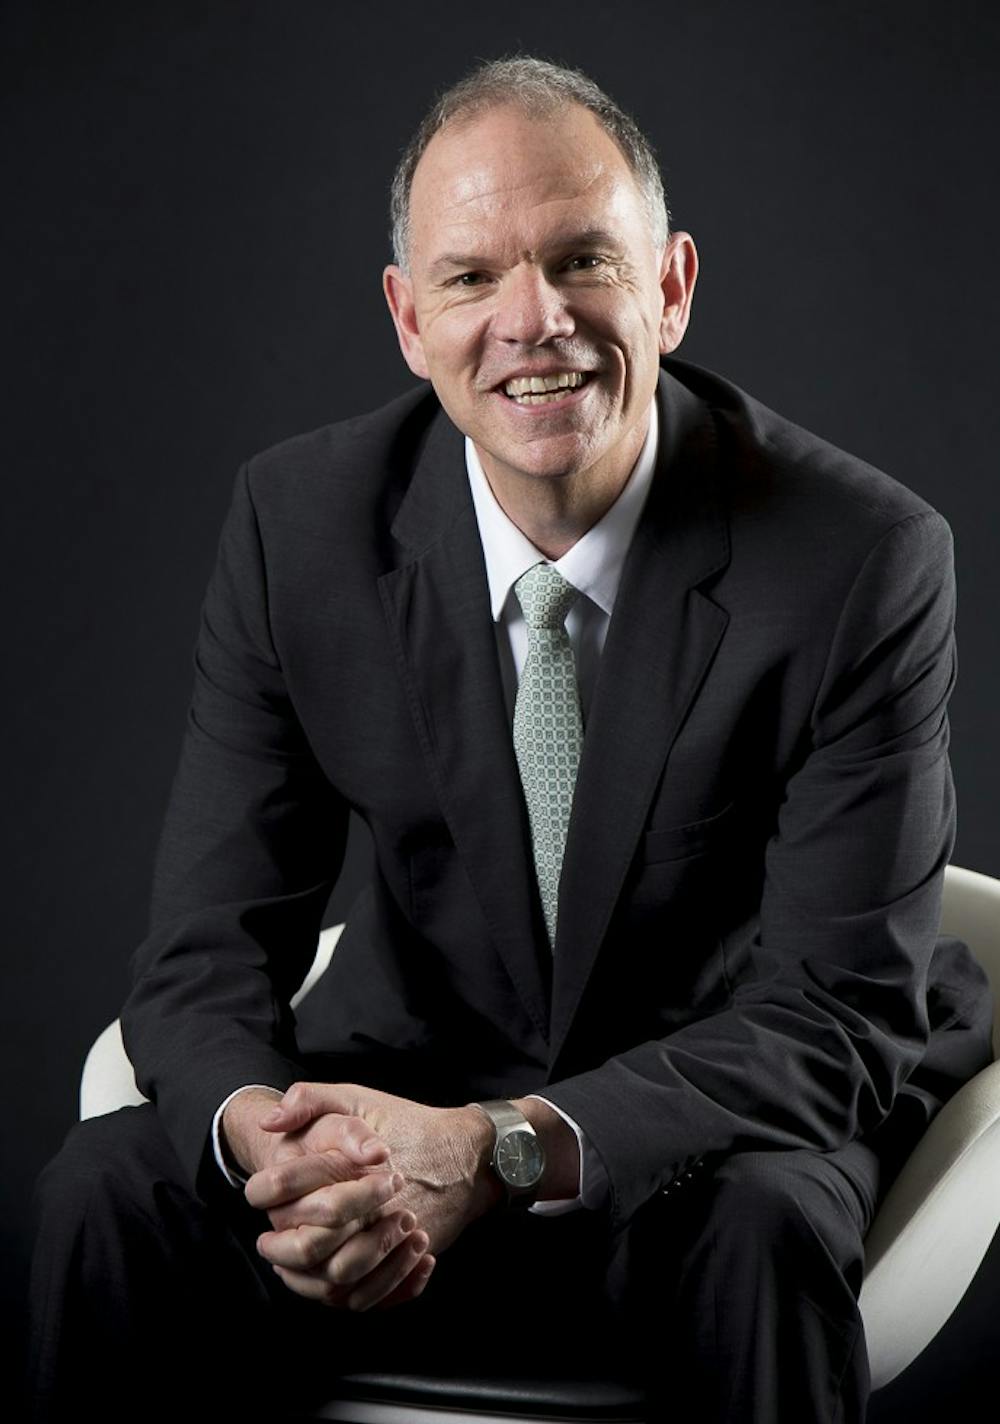 Former dean at the Australian School of Business at the University of New South Wales, Geoffrey Garrett, will become Wharton's new dean on July 1. 